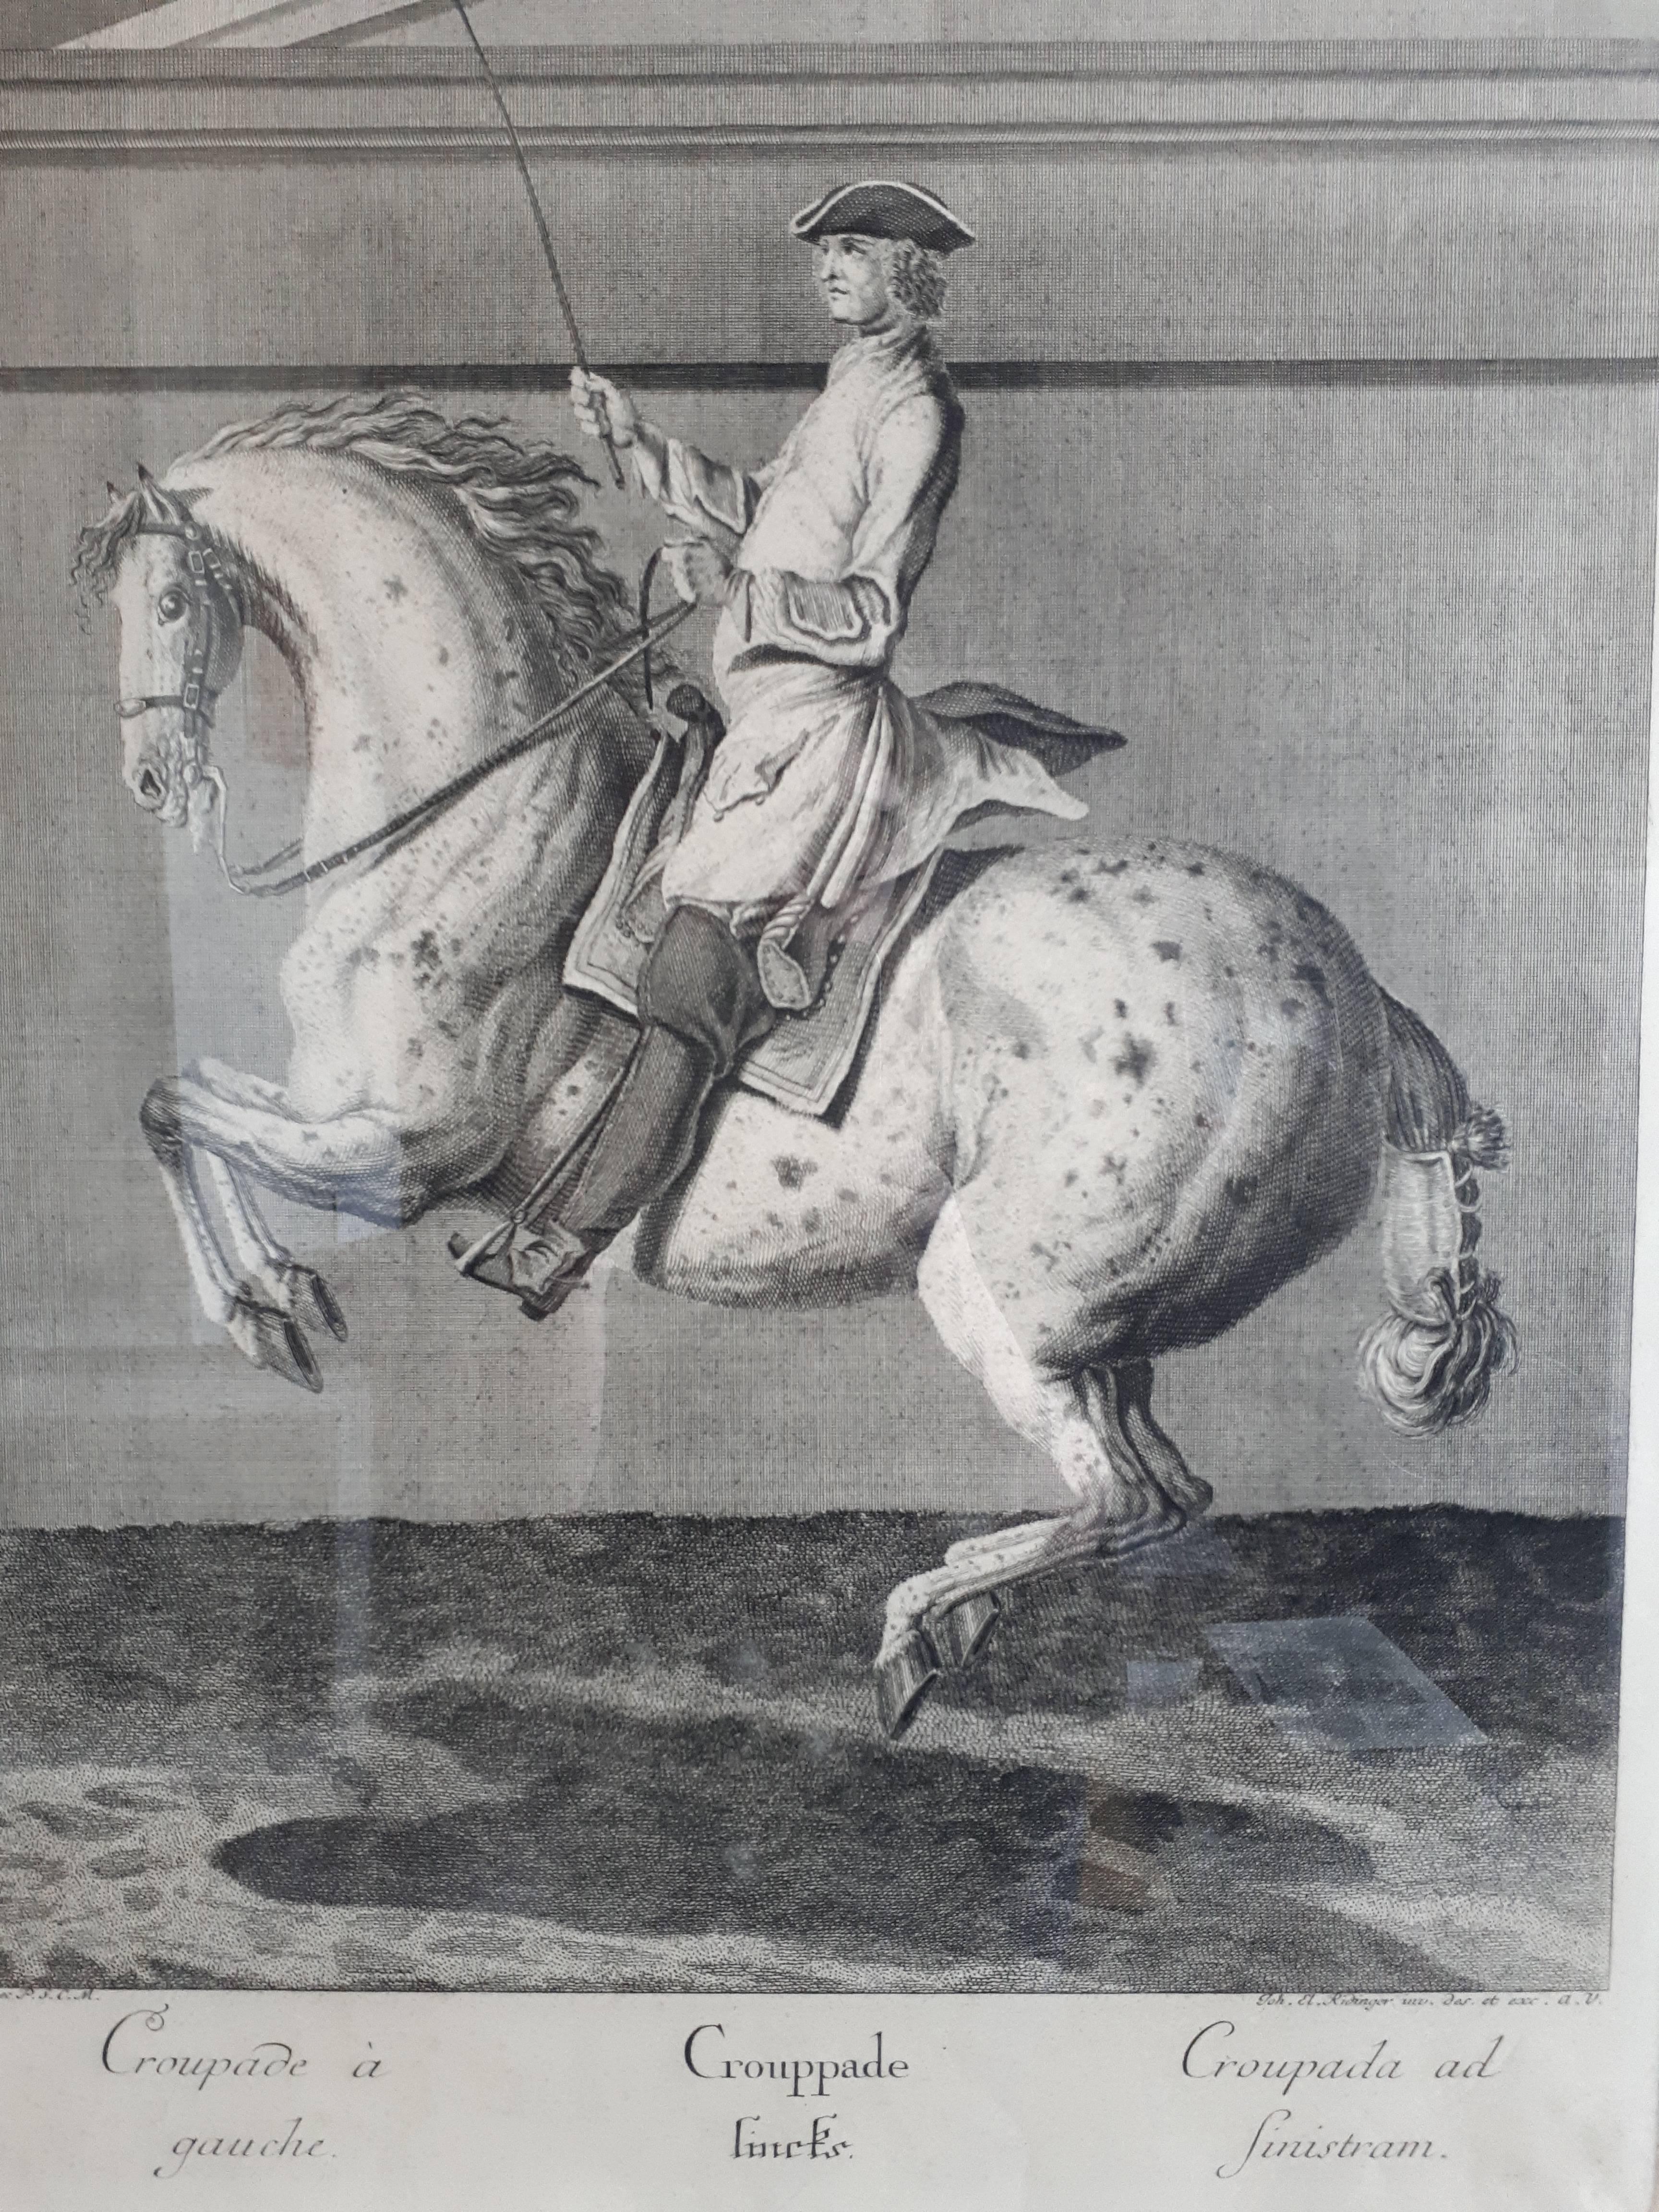 Antique print titled 'Croupade à gauche. Crouppade lincks. Croupada ad sinistram'. Croupade is a movement in which a horse jumps up from a pesade with all four legs drawn up under it and lands on four legs in the same place.